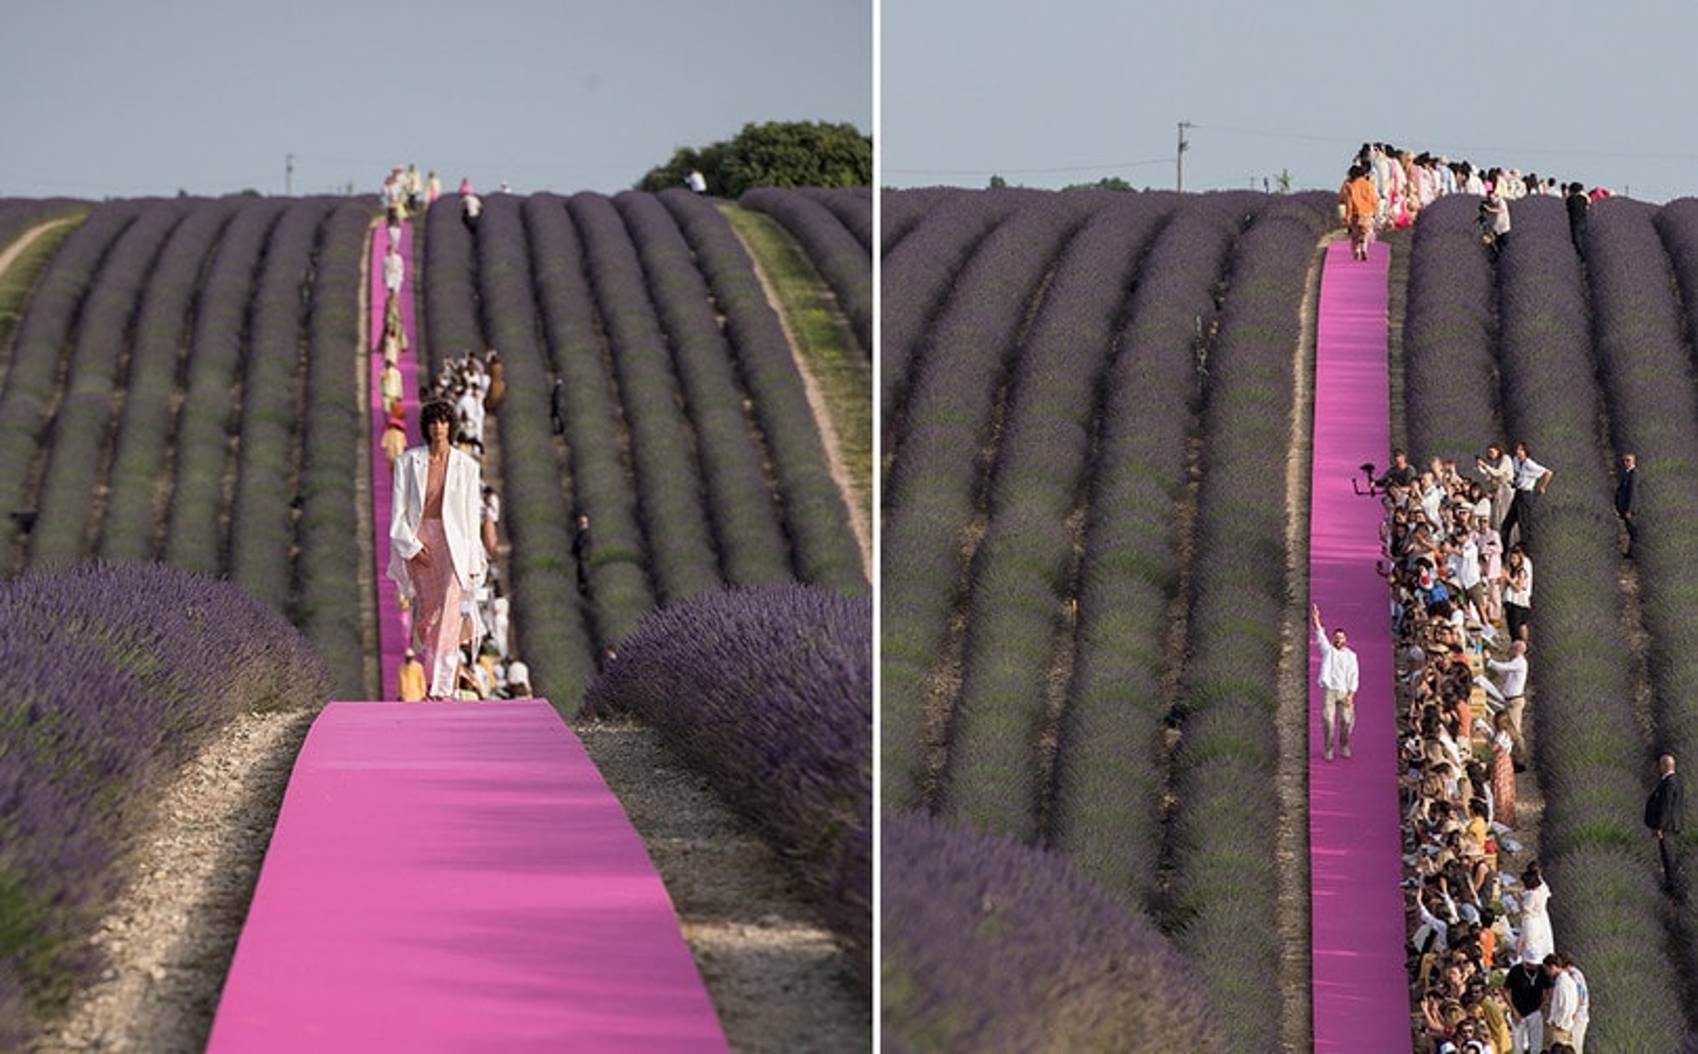 Jacquemus SS20 show in lavender fields